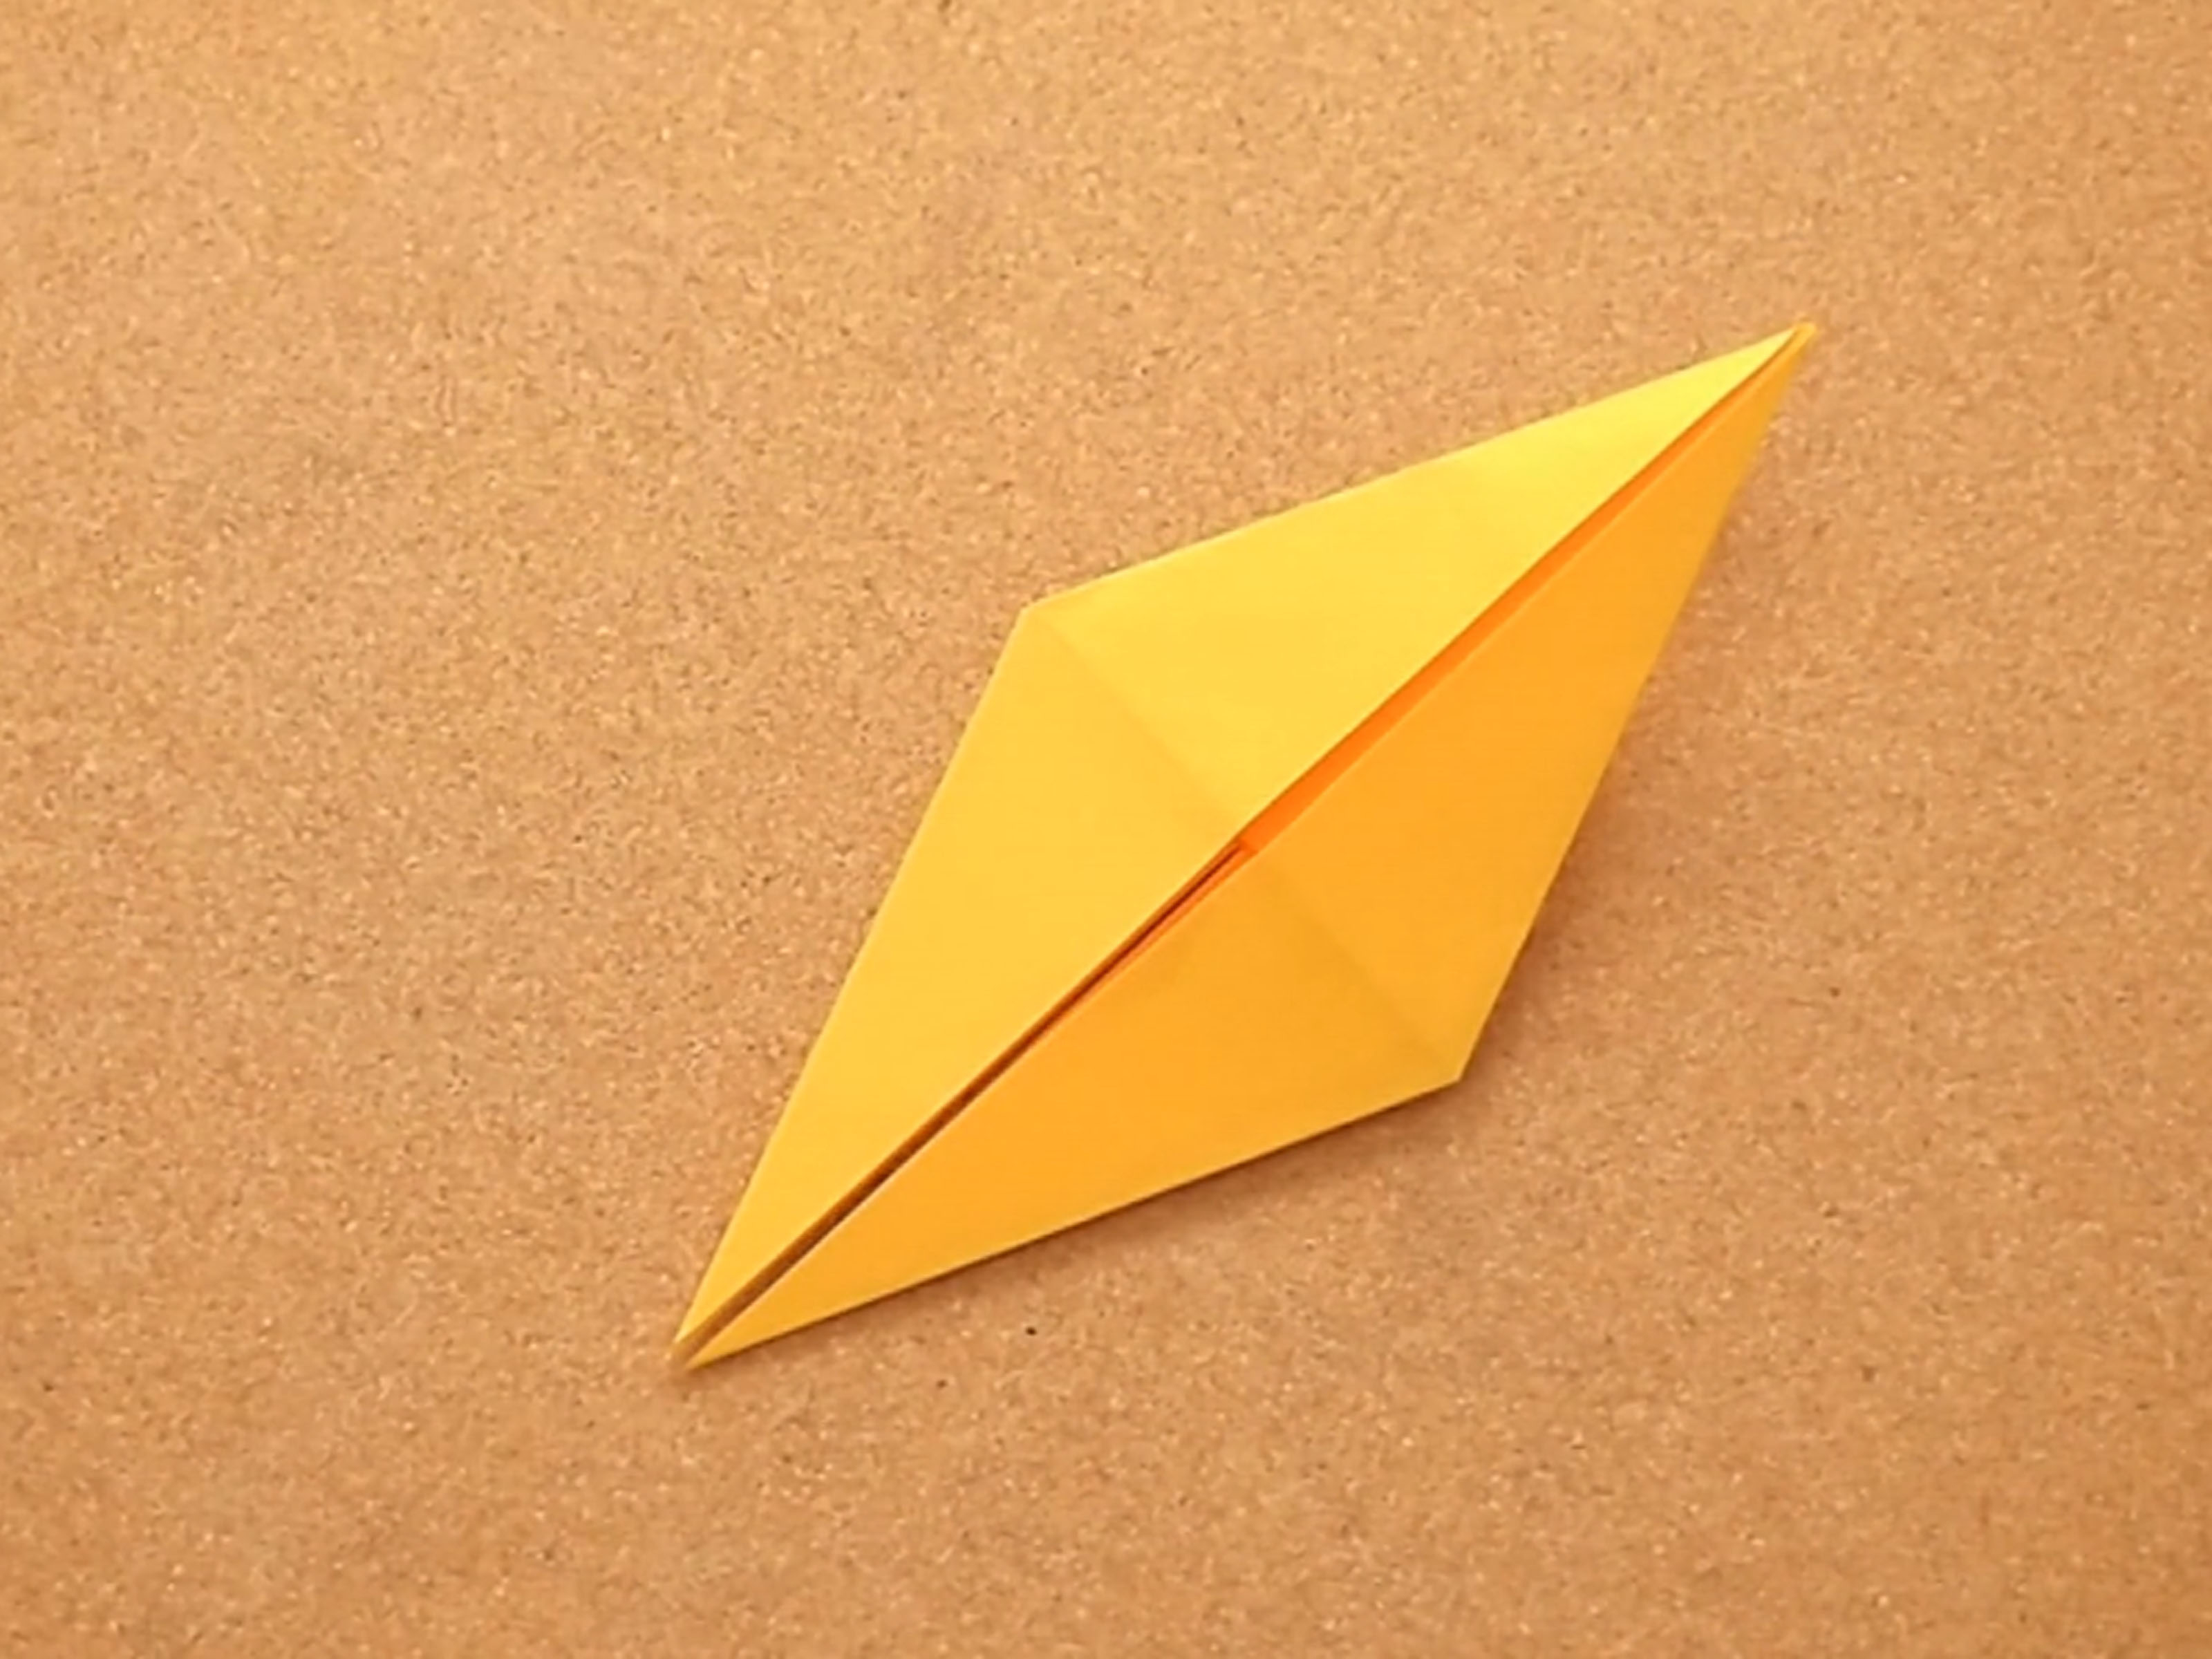 How To Make A Bird With Origami How To Make An Origami Bird Base 13 Steps With Pictures